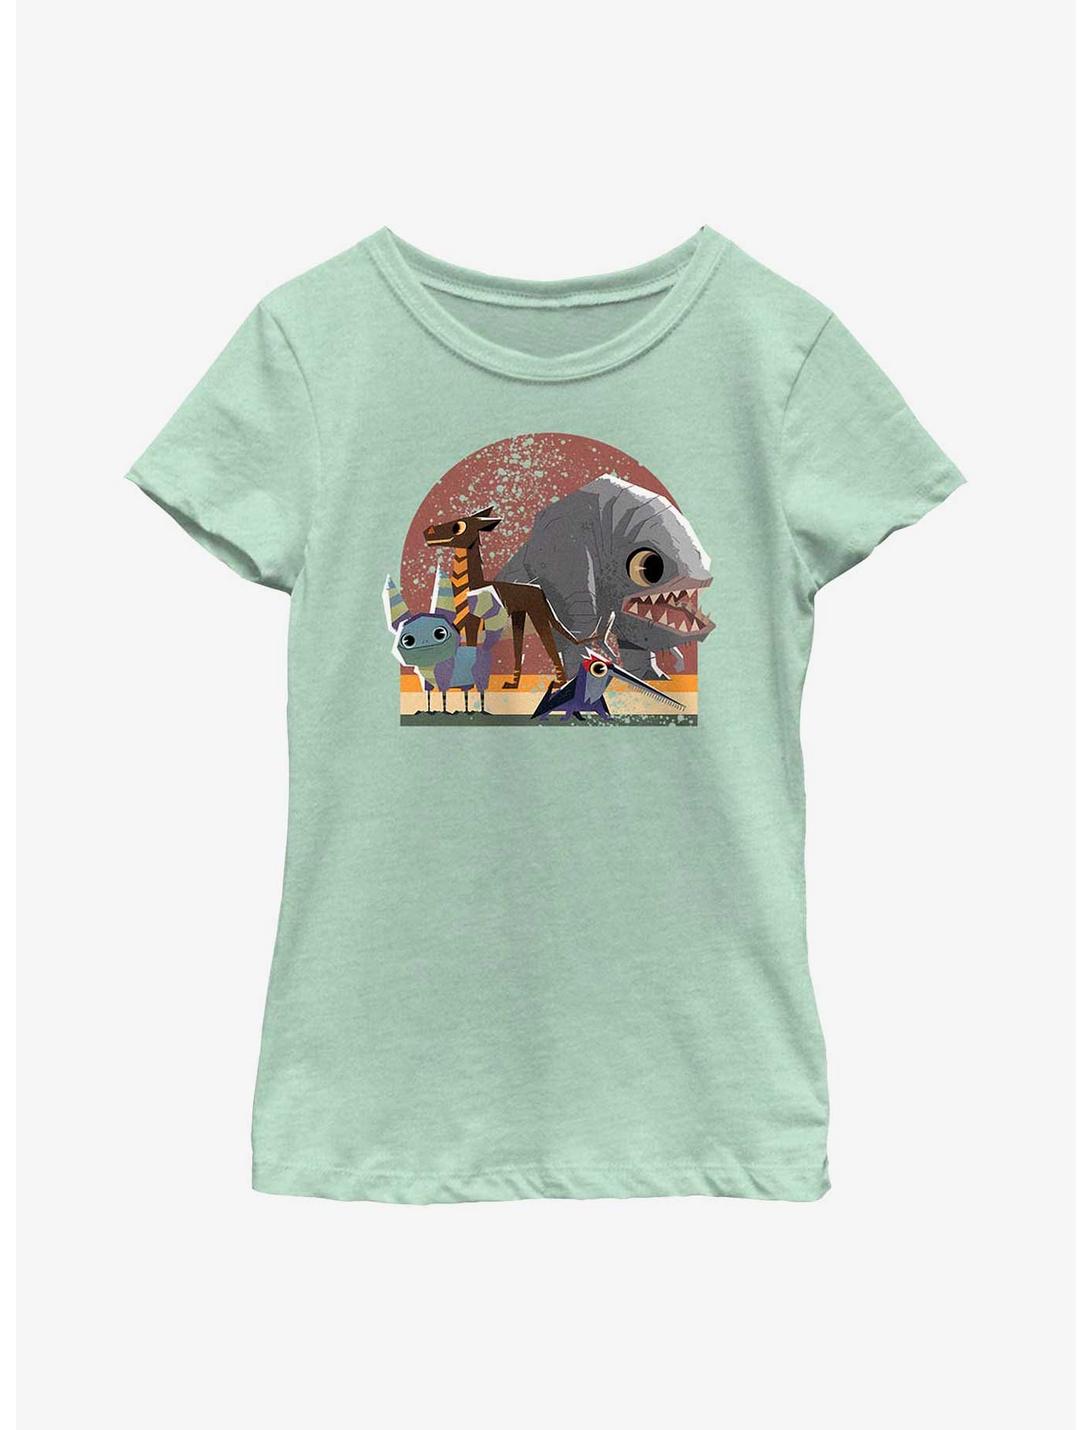 Star Wars Galaxy Of Creatures Creature Group Youth Girls T-Shirt, MINT, hi-res